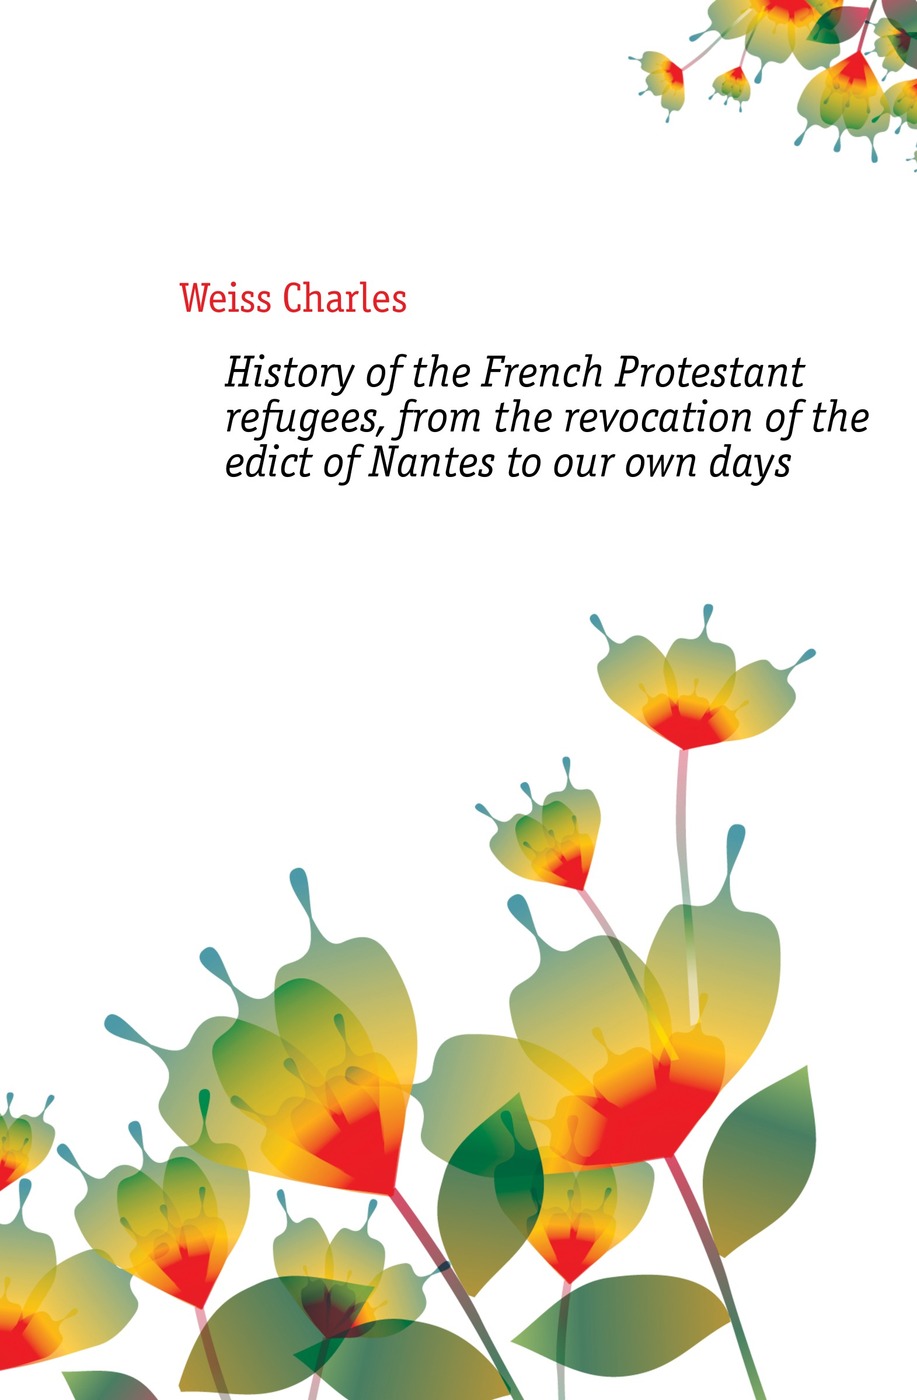 History of the French Protestant refugees, from the revocation of the edict of Nantes to our own days